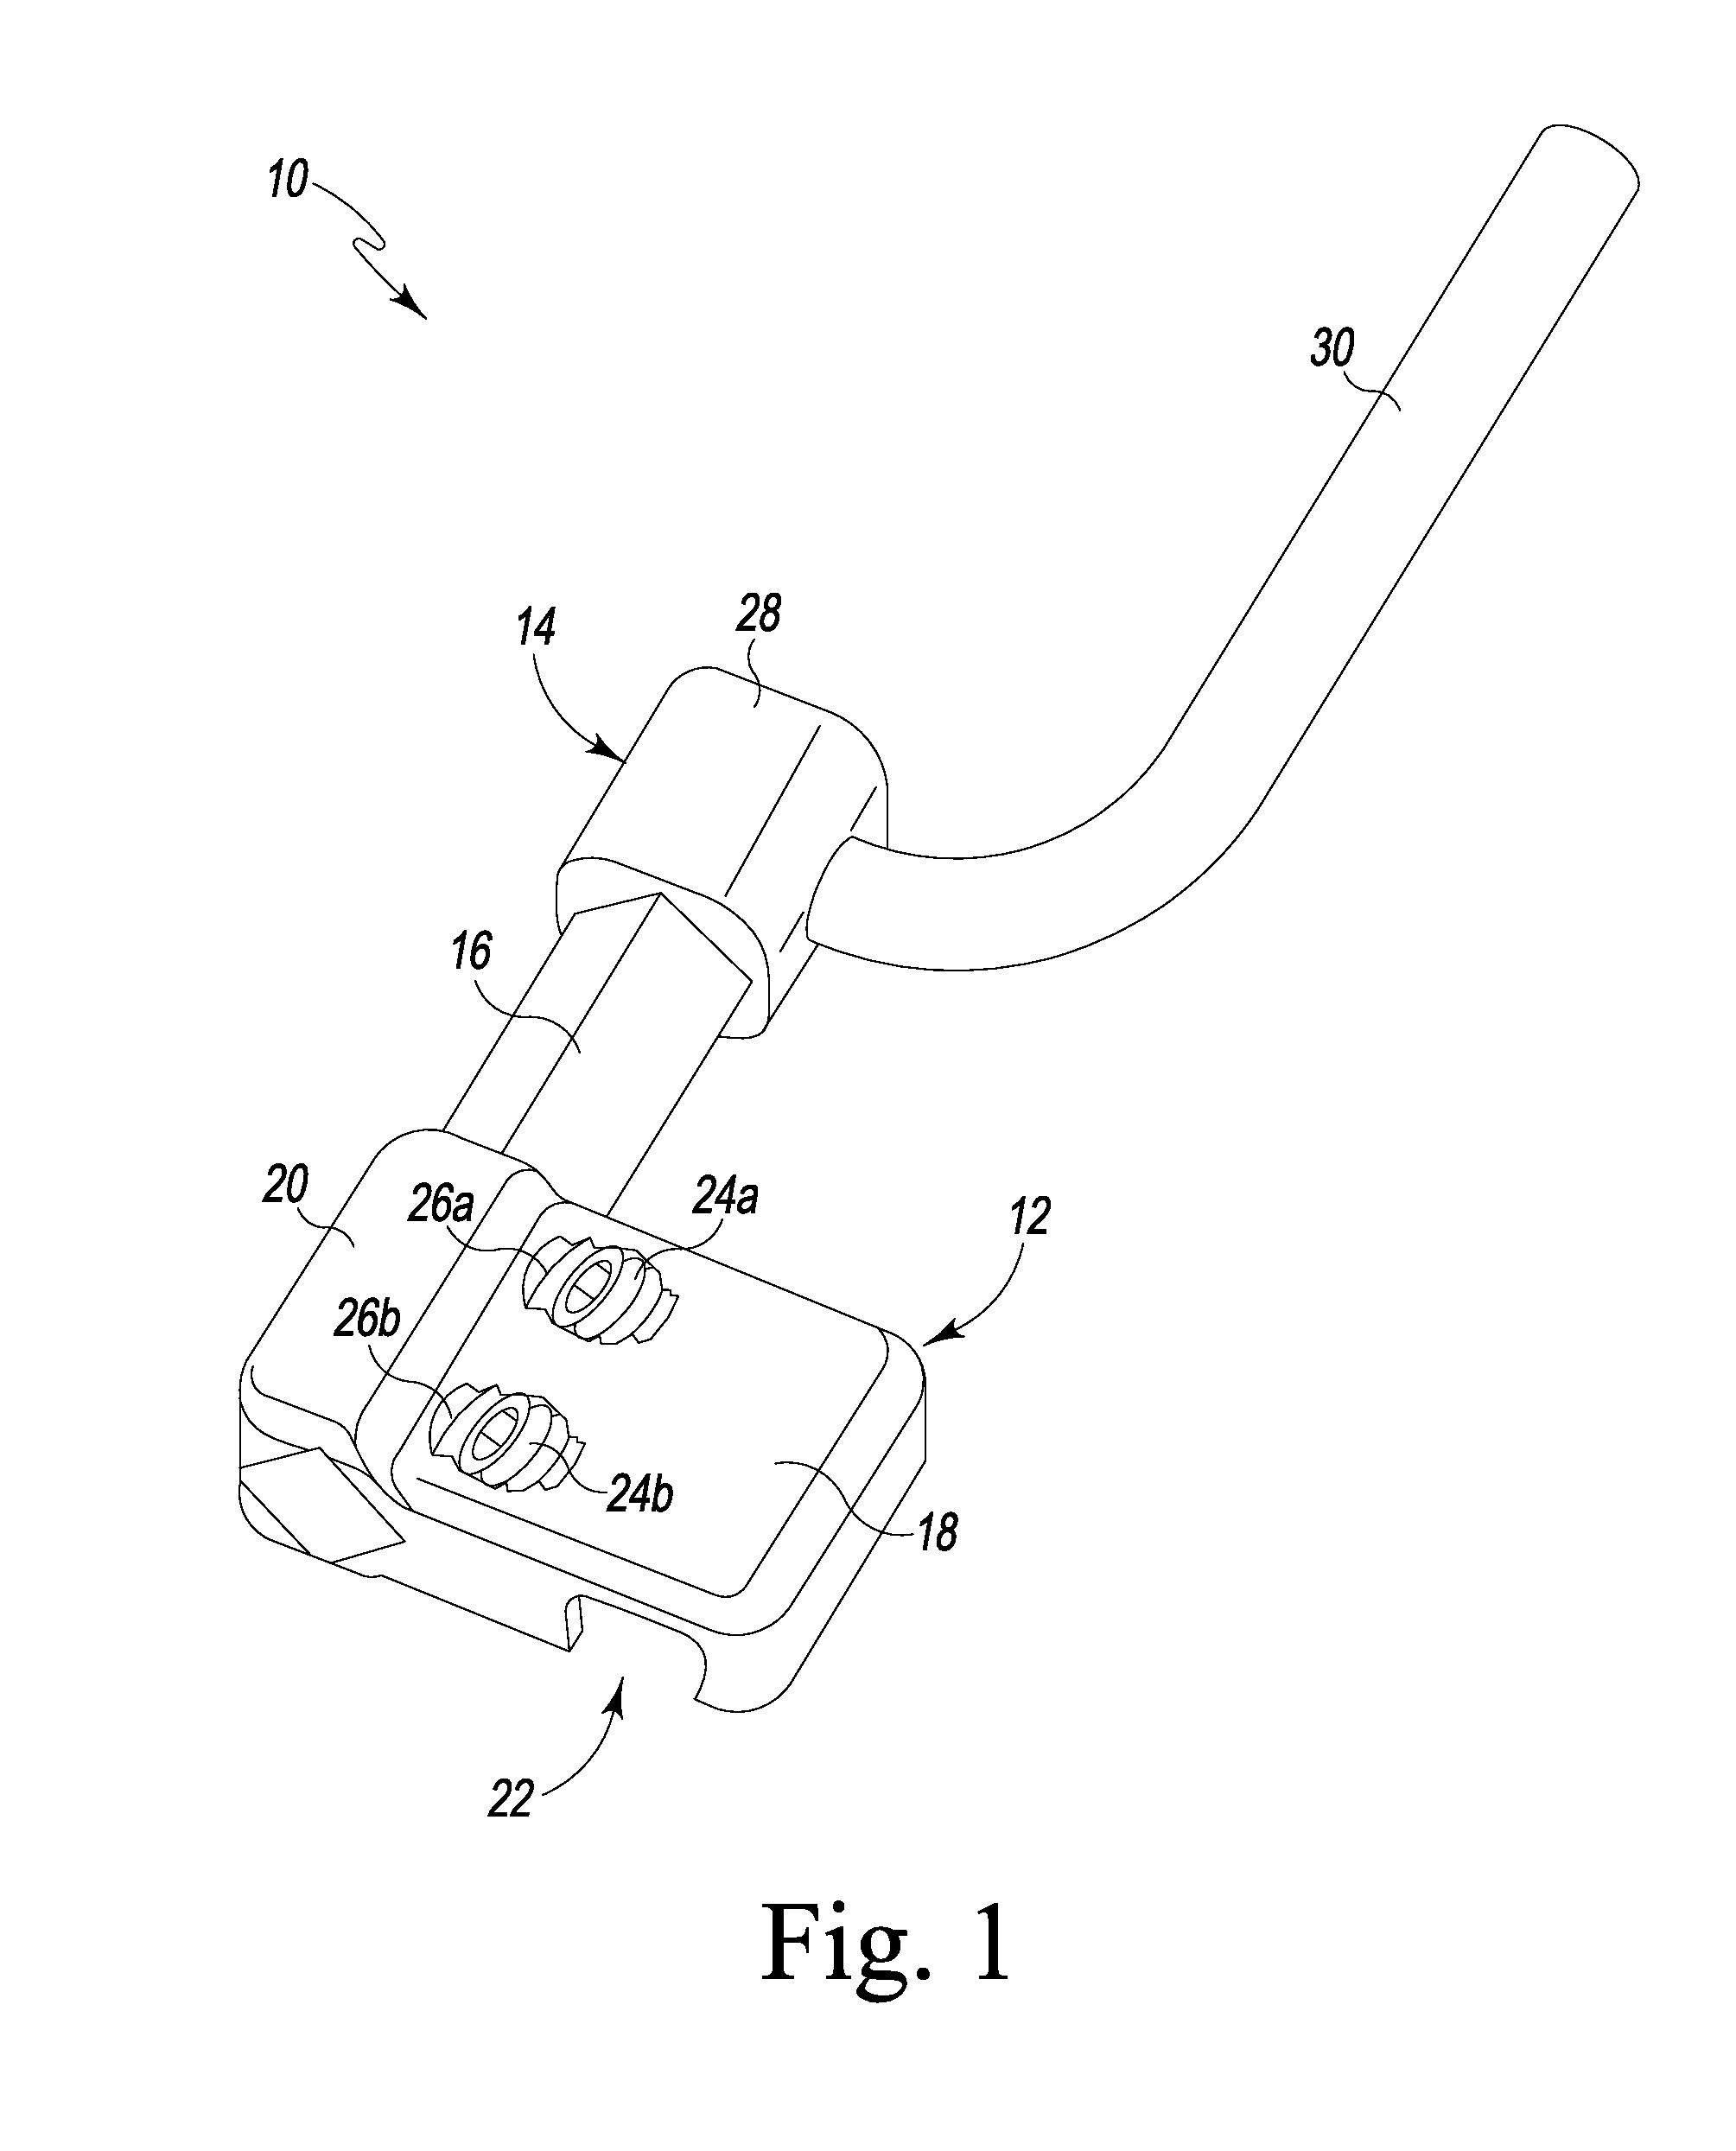 Supplementary Spinal Fixation/Stabilization Apparatus With Dynamic Inter-Vertebral Connection